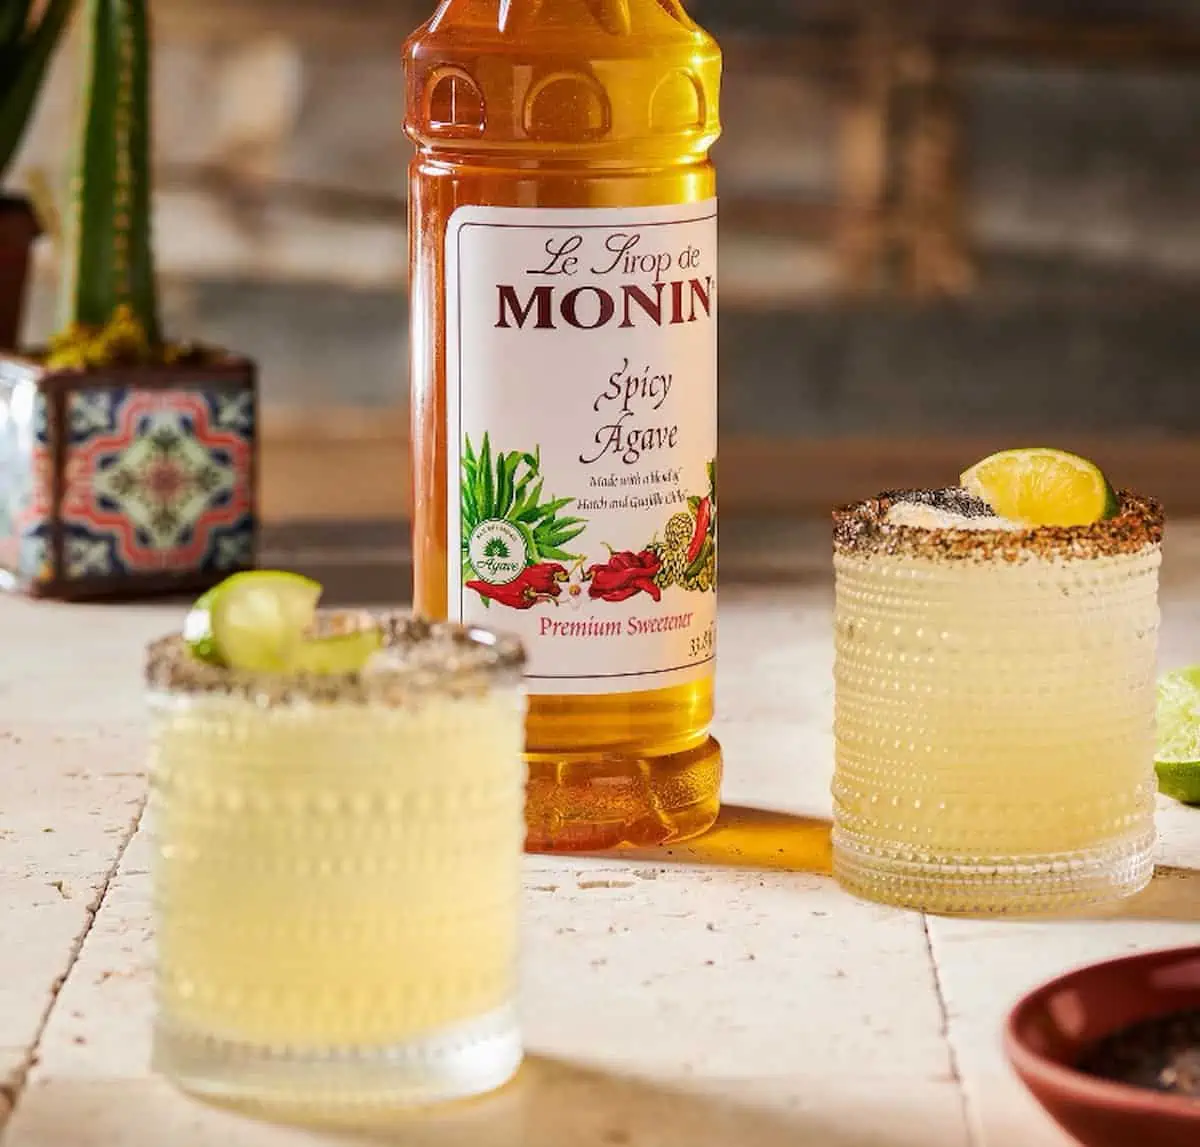 Bottle of Le Sirop de Monin Spicy Agave next to two small glasses of margaritas with limes.